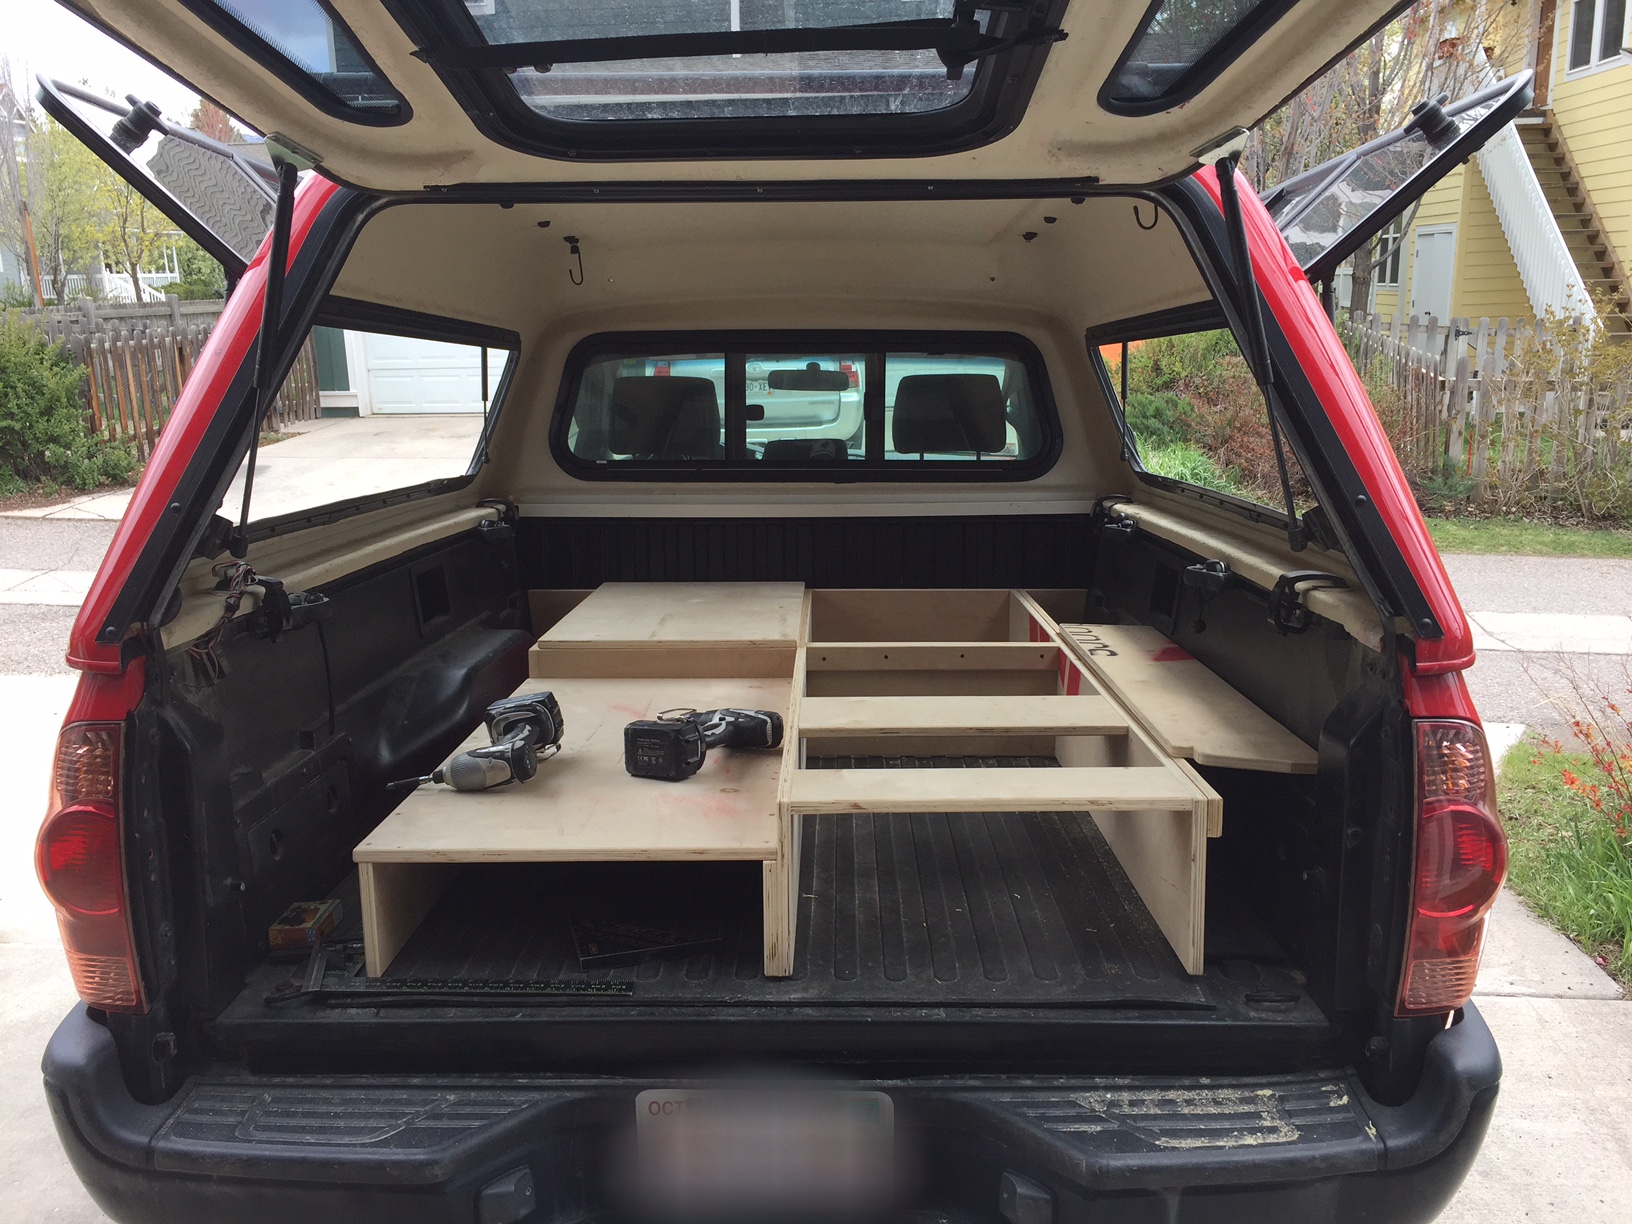 vanlife build out